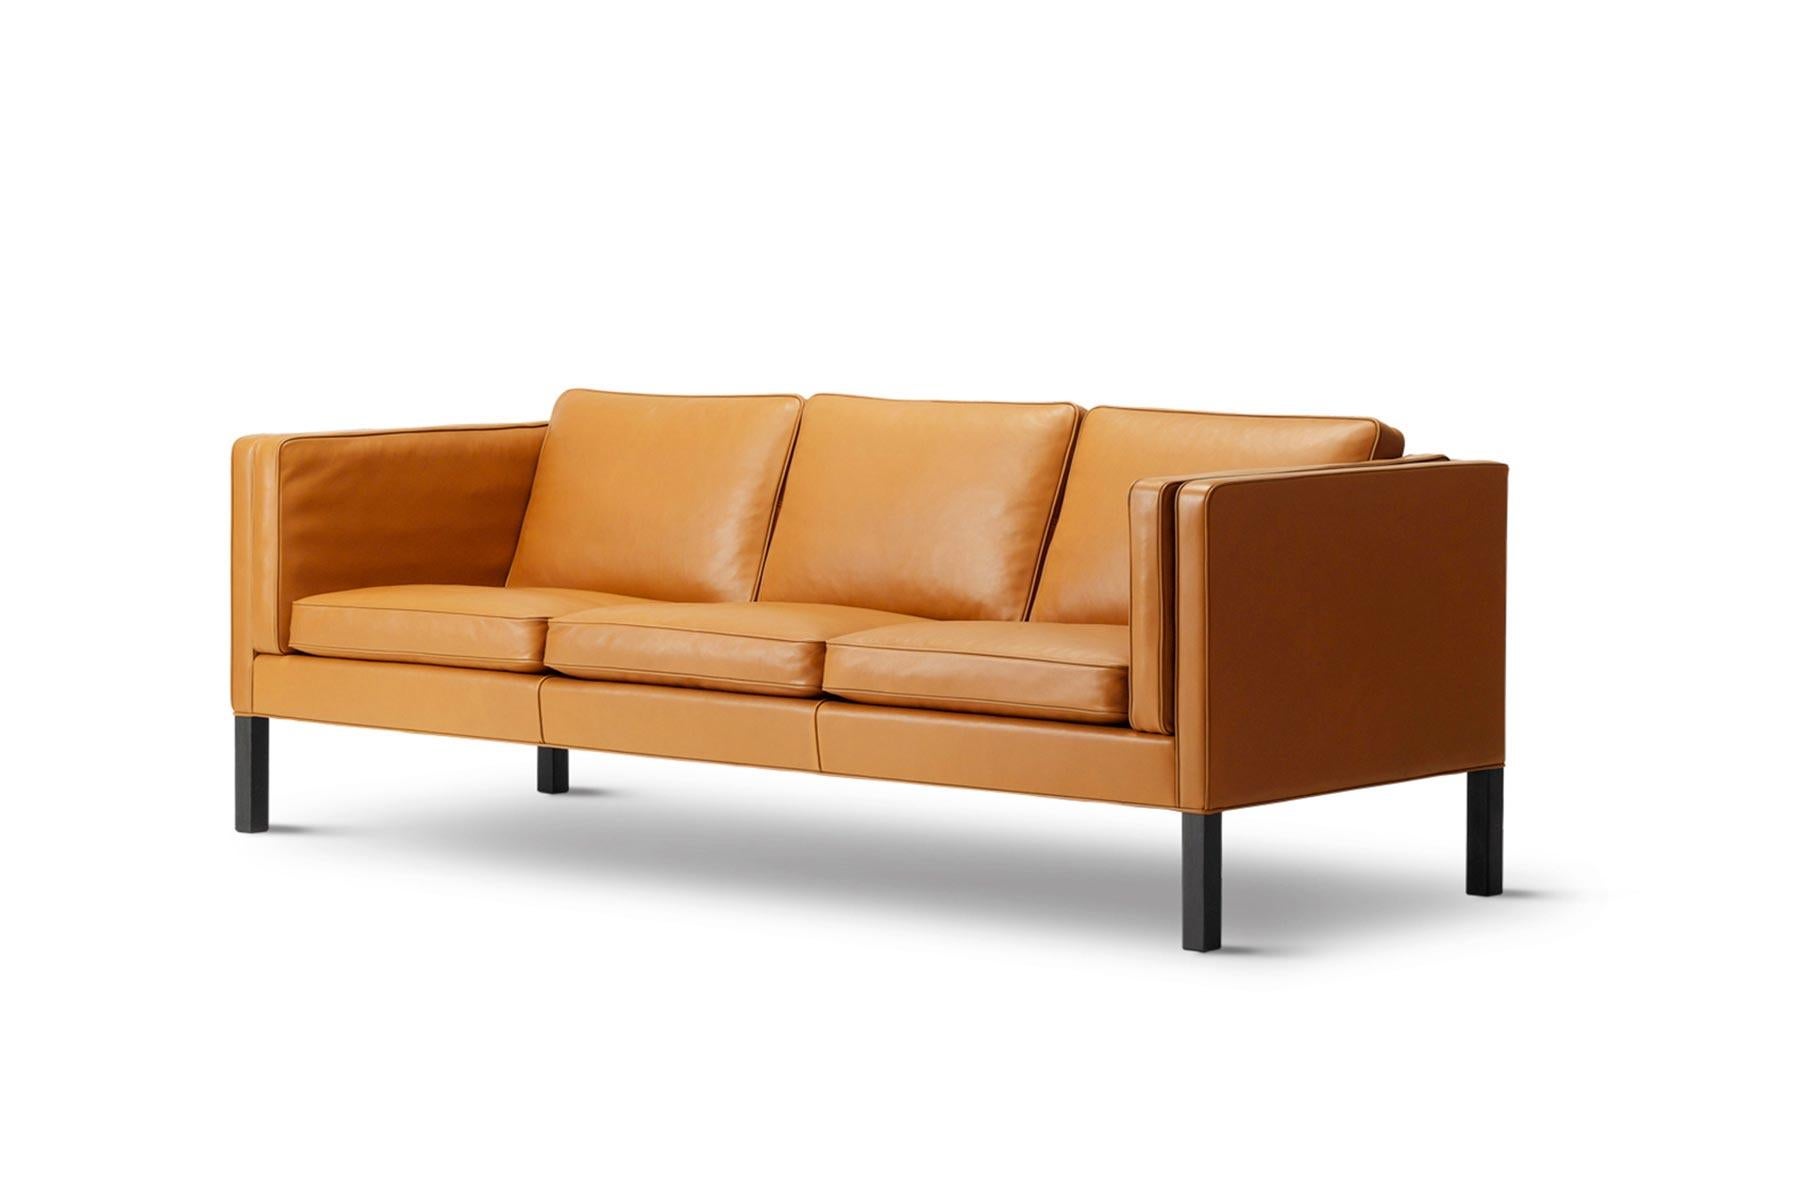 The 2333 3-seater sofa with rectangular sides was the last piece of furniture Børge Mogensen designed. The geometric design was the conclusion of Mogensen’s minimalist exclusive upholstered furniture range.